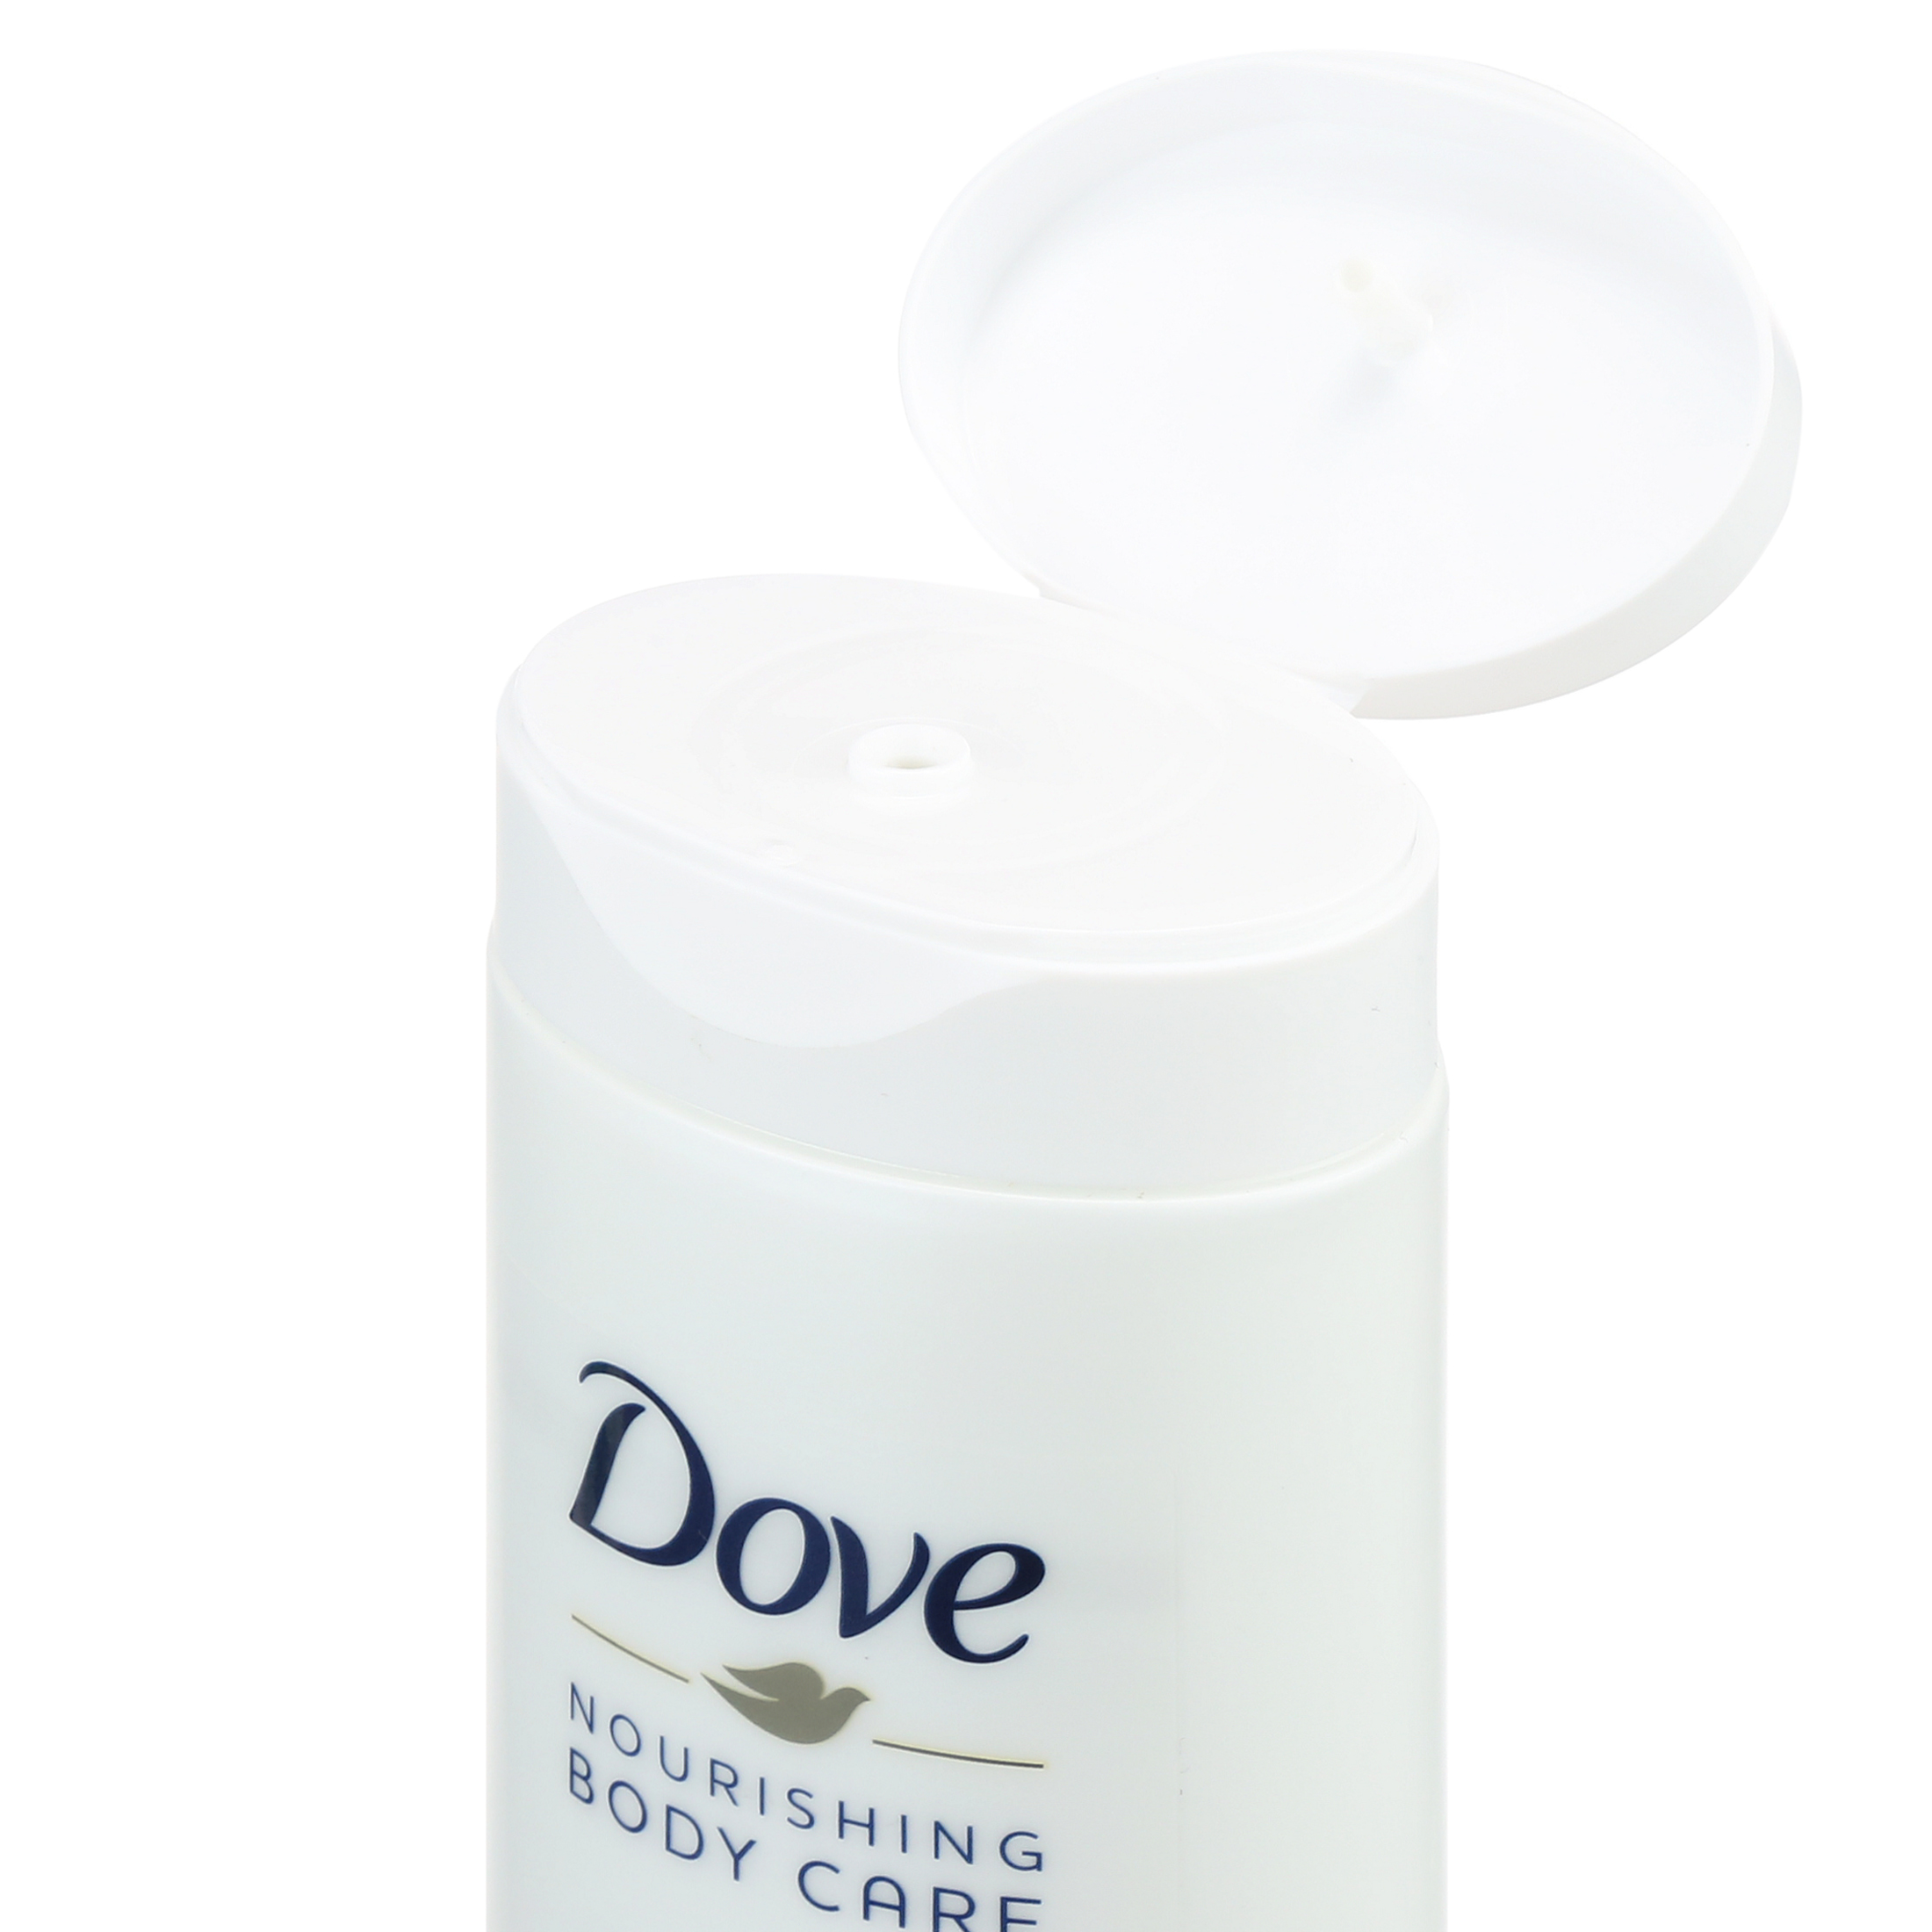 Dove Body Lotion Shea Butter 13.5 oz - image 5 of 9